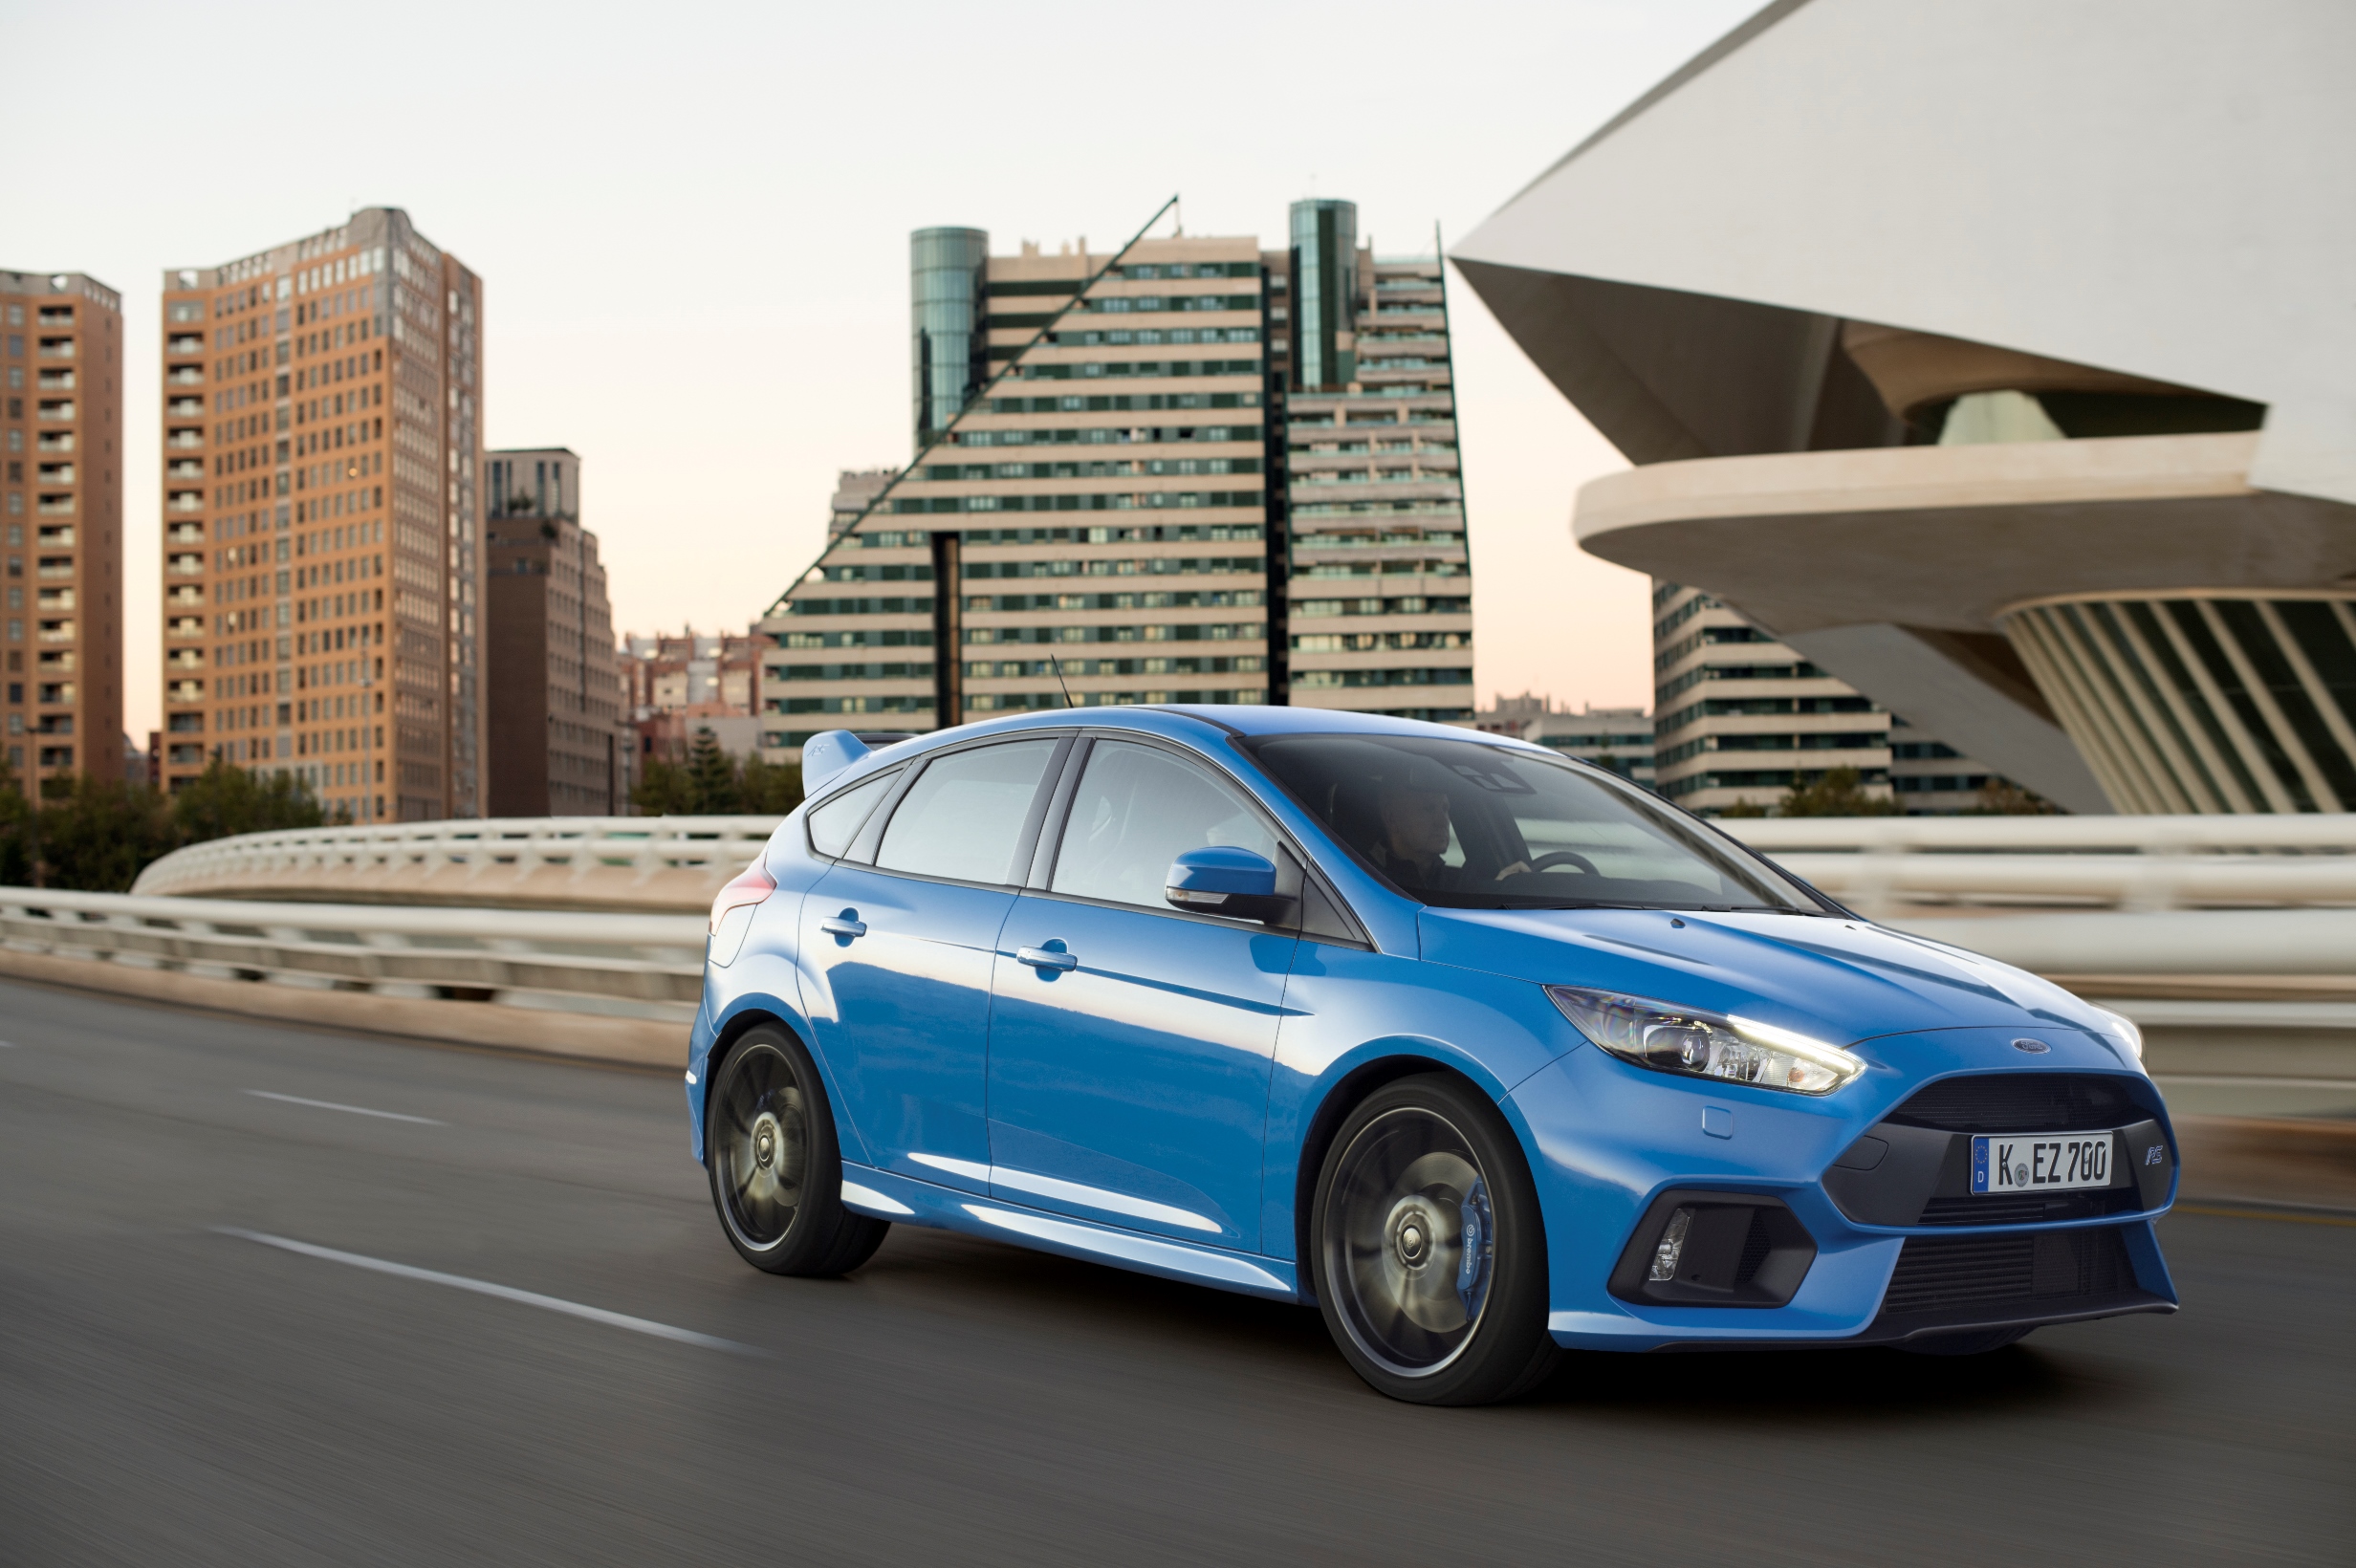 The Focus RS is the first Ford RS equipped with selectable Drive Modes